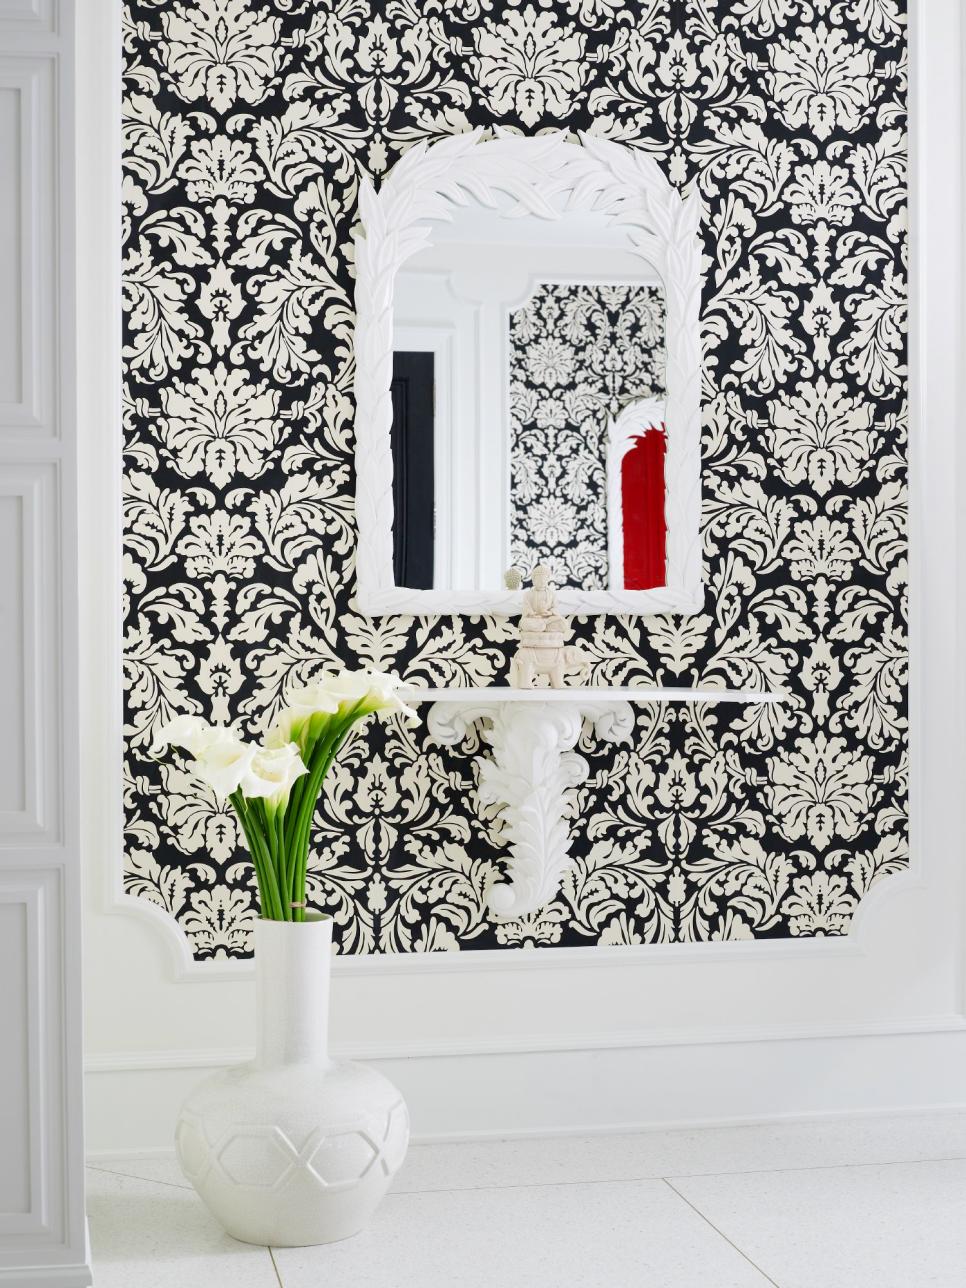 Entryway With Bold, Black and White Damask Wallpaper and White Mirror